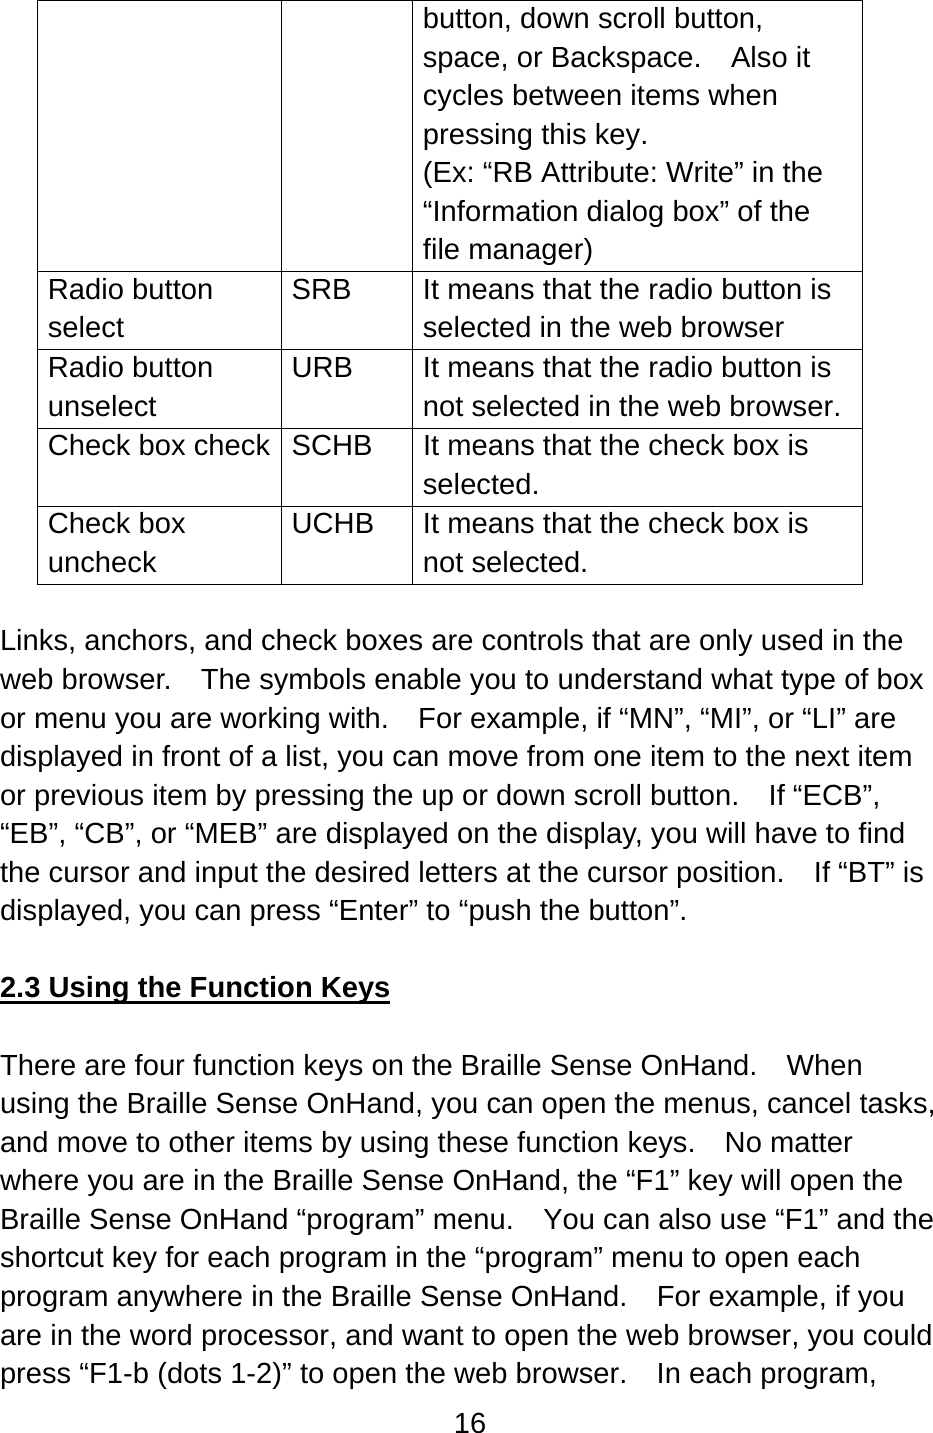 16  button, down scroll button, space, or Backspace.    Also it cycles between items when pressing this key. (Ex: “RB Attribute: Write” in the “Information dialog box” of the file manager) Radio button select SRB  It means that the radio button is selected in the web browser Radio button unselect URB  It means that the radio button is not selected in the web browser. Check box check  SCHB  It means that the check box is selected. Check box uncheck UCHB  It means that the check box is not selected.  Links, anchors, and check boxes are controls that are only used in the web browser.    The symbols enable you to understand what type of box or menu you are working with.    For example, if “MN”, “MI”, or “LI” are displayed in front of a list, you can move from one item to the next item or previous item by pressing the up or down scroll button.    If “ECB”, “EB”, “CB”, or “MEB” are displayed on the display, you will have to find the cursor and input the desired letters at the cursor position.    If “BT” is displayed, you can press “Enter” to “push the button”.  2.3 Using the Function Keys  There are four function keys on the Braille Sense OnHand.    When using the Braille Sense OnHand, you can open the menus, cancel tasks, and move to other items by using these function keys.    No matter where you are in the Braille Sense OnHand, the “F1” key will open the Braille Sense OnHand “program” menu.    You can also use “F1” and the shortcut key for each program in the “program” menu to open each program anywhere in the Braille Sense OnHand.    For example, if you are in the word processor, and want to open the web browser, you could press “F1-b (dots 1-2)” to open the web browser.    In each program, 